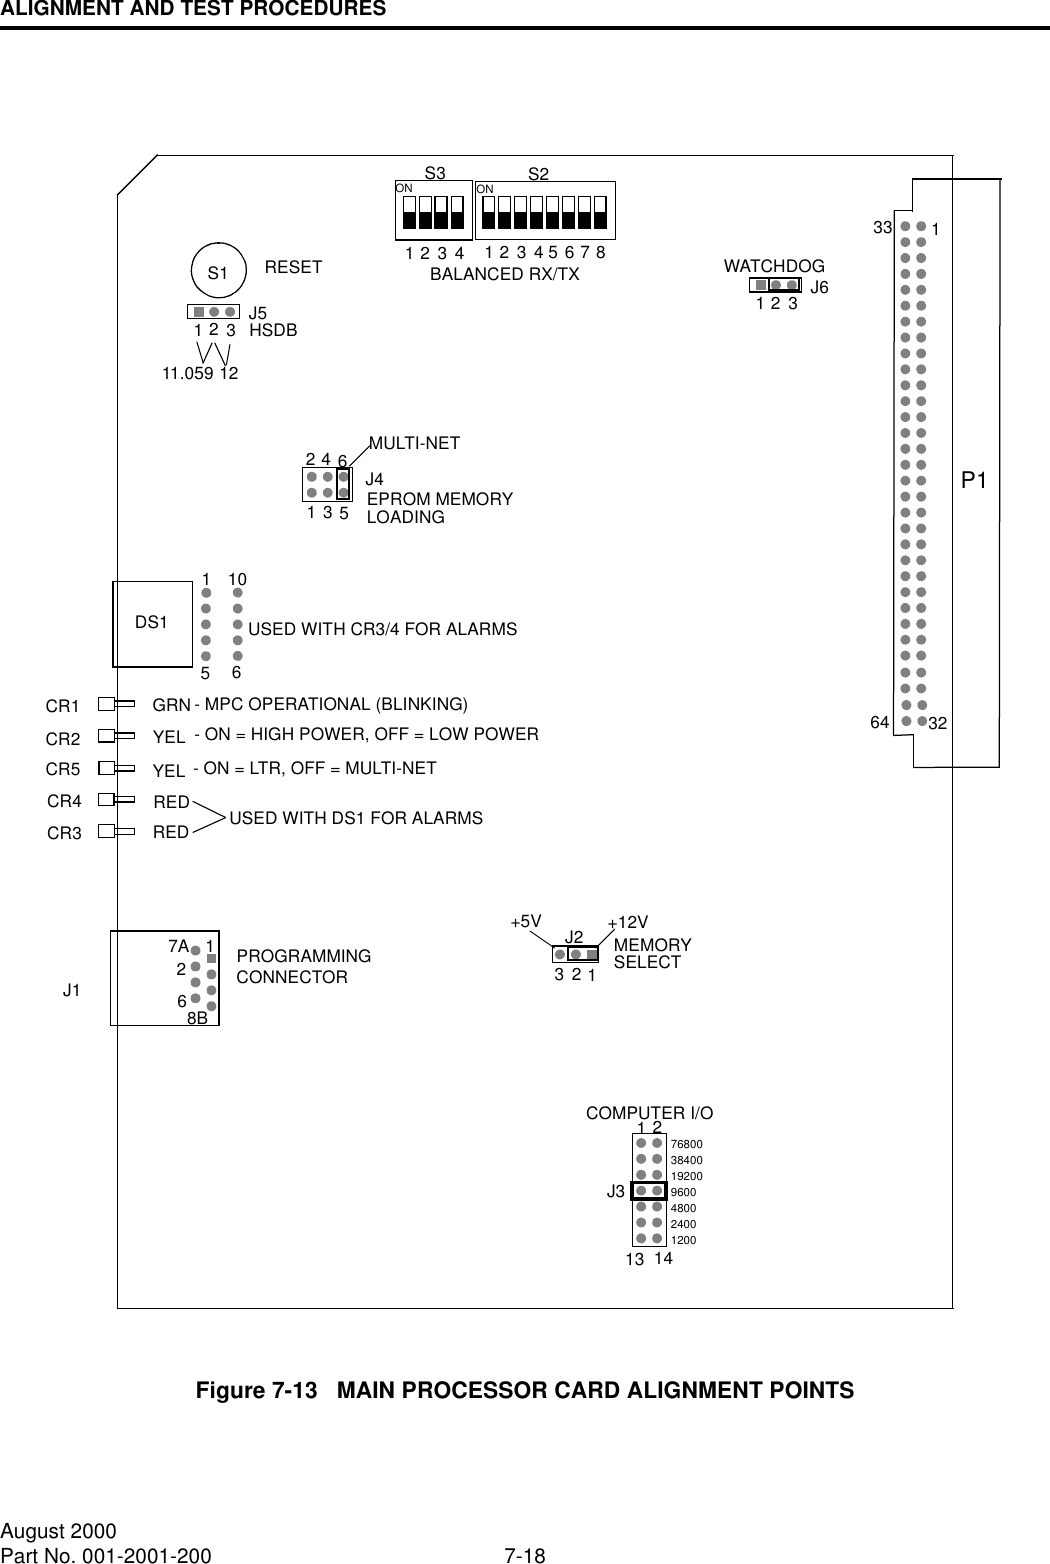 ALIGNMENT AND TEST PROCEDURES7-18August 2000Part No. 001-2001-200Figure 7-13   MAIN PROCESSOR CARD ALIGNMENT POINTSP113364 321234 12345678S212345611056J4DS1CR1CR2CR4J117A268BS1J2123121413J3GRNYELYELREDREDCOMPUTER I/OPROGRAMMINGCONNECTORRESETON ONS3123J5 123J6CR5CR3768003840019200960048002400120011.059 12HSDBMULTI-NETEPROM MEMORYLOADINGWATCHDOGBALANCED RX/TX- MPC OPERATIONAL (BLINKING)- ON = HIGH POWER, OFF = LOW POWER- ON = LTR, OFF = MULTI-NETUSED WITH DS1 FOR ALARMSUSED WITH CR3/4 FOR ALARMS+5V +12VMEMORYSELECT